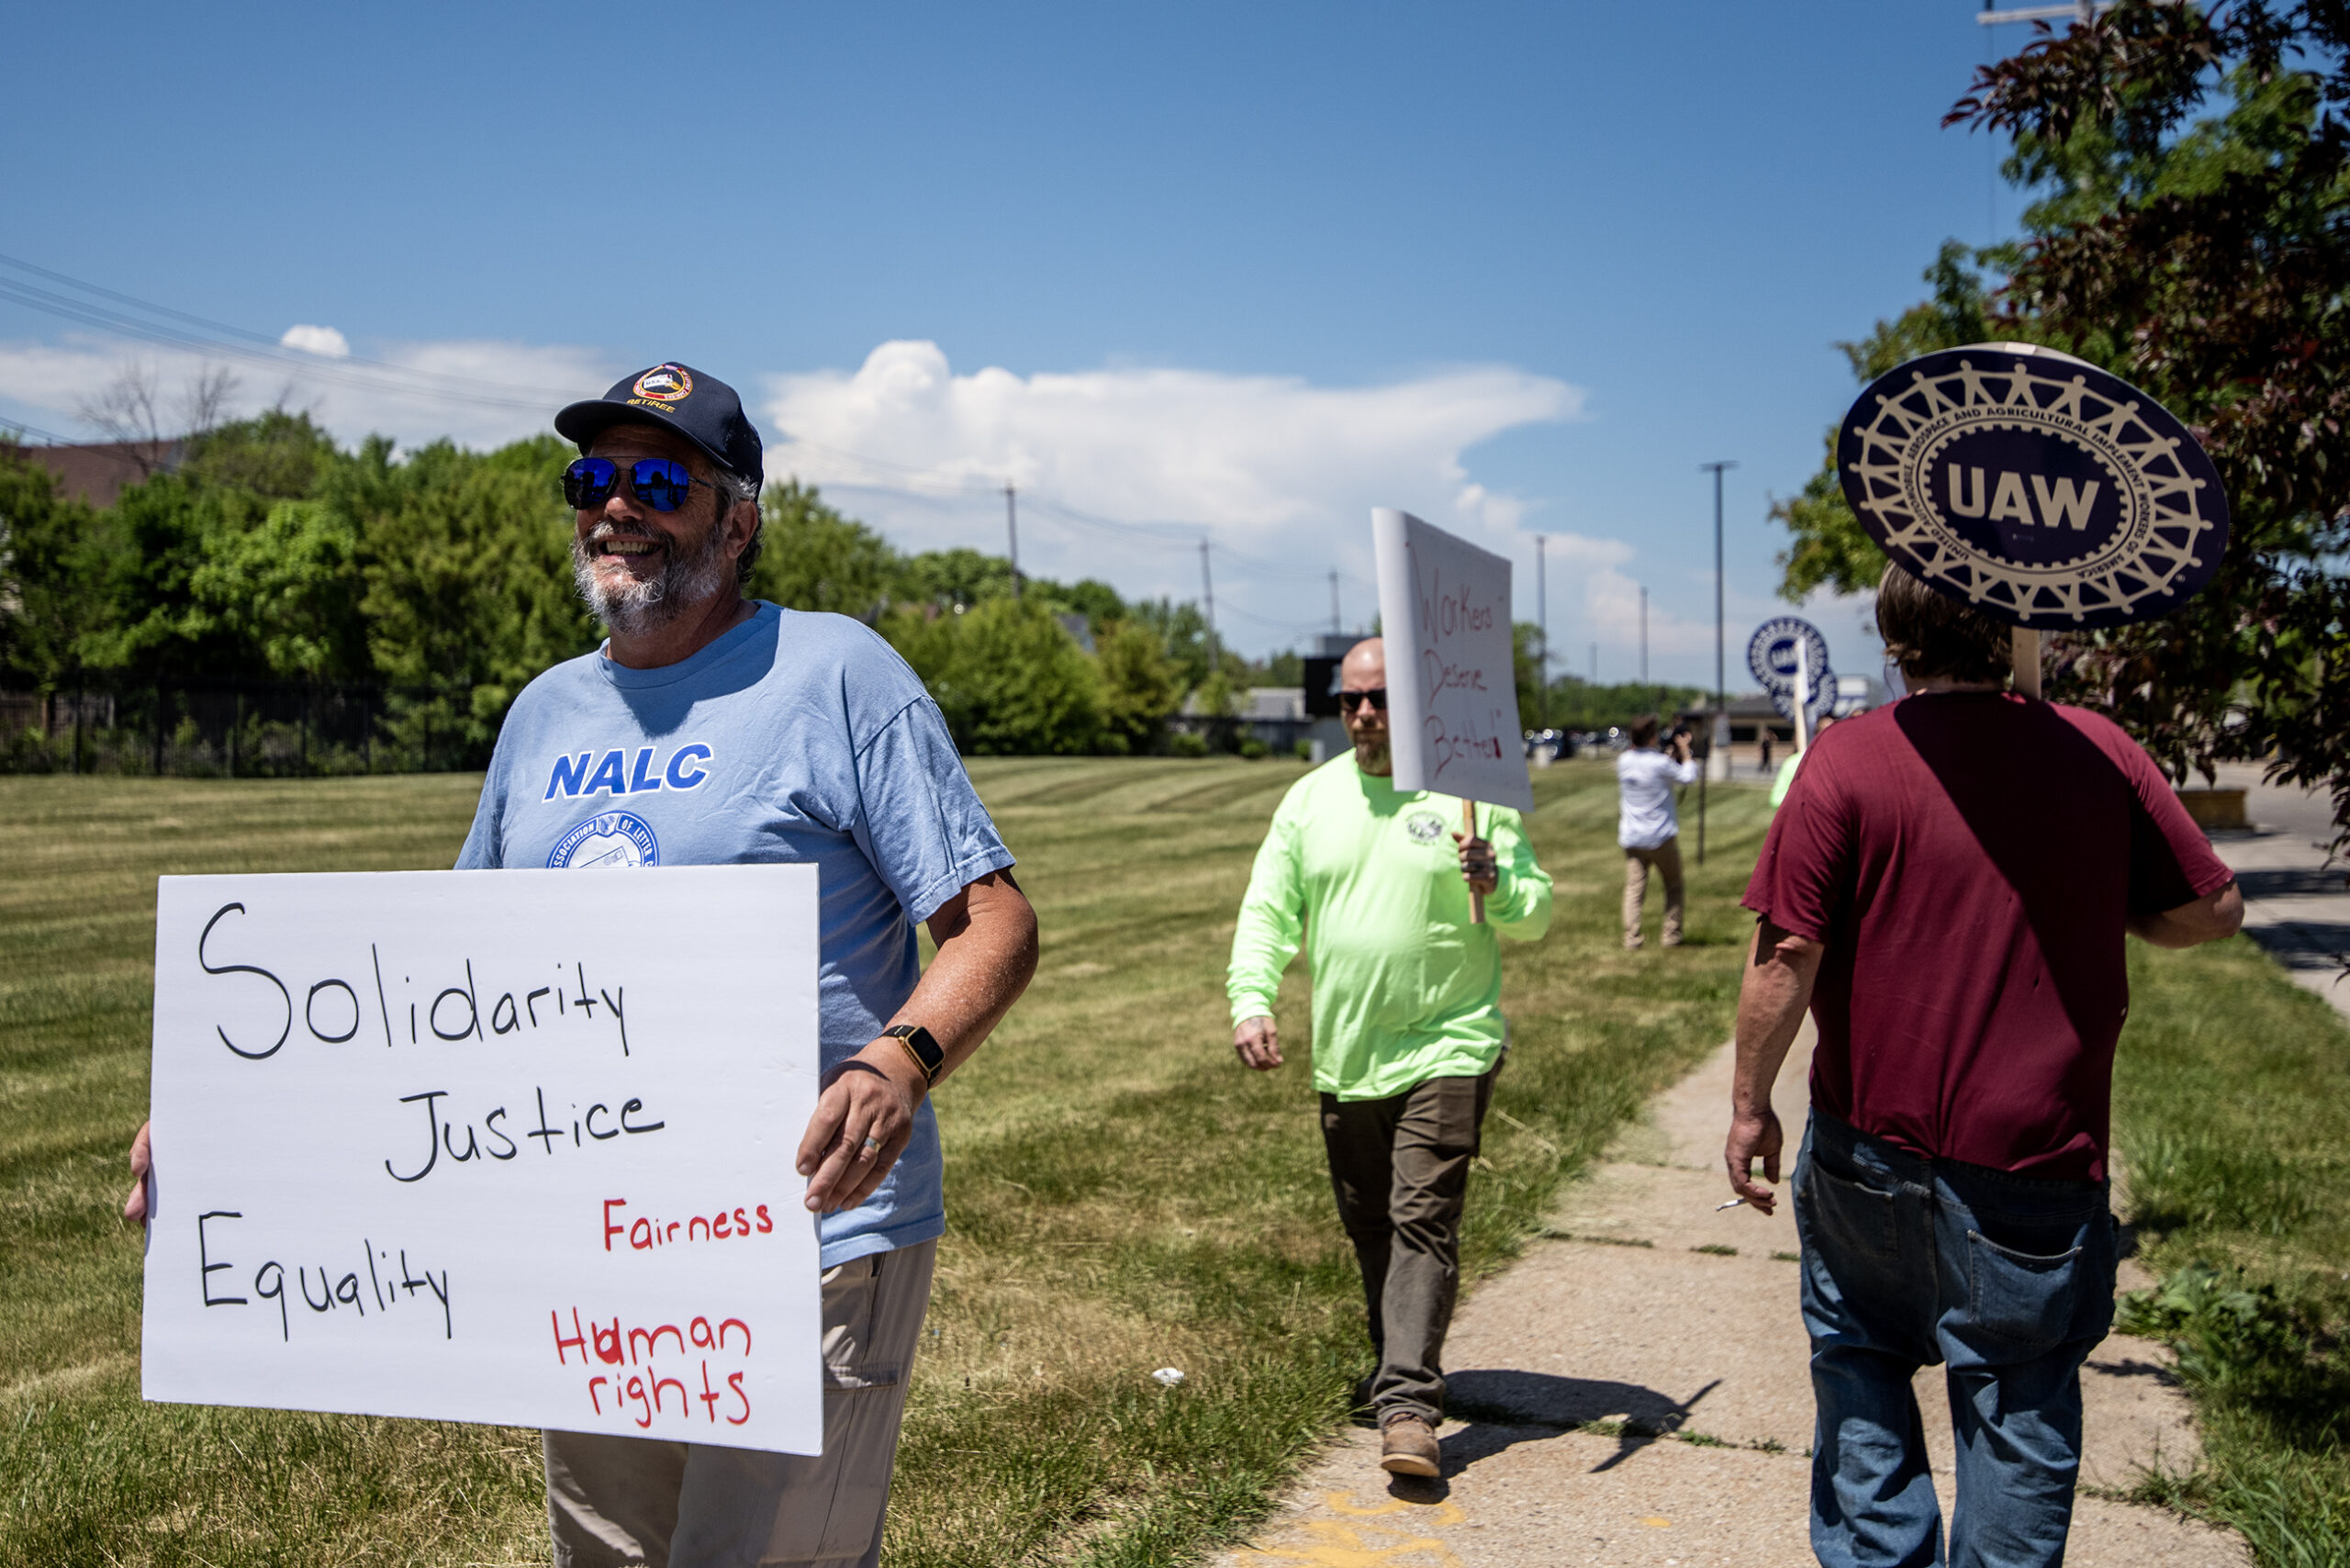 Several people can be seen on a sidewalk on a sunny day. A sign held by a protester says 